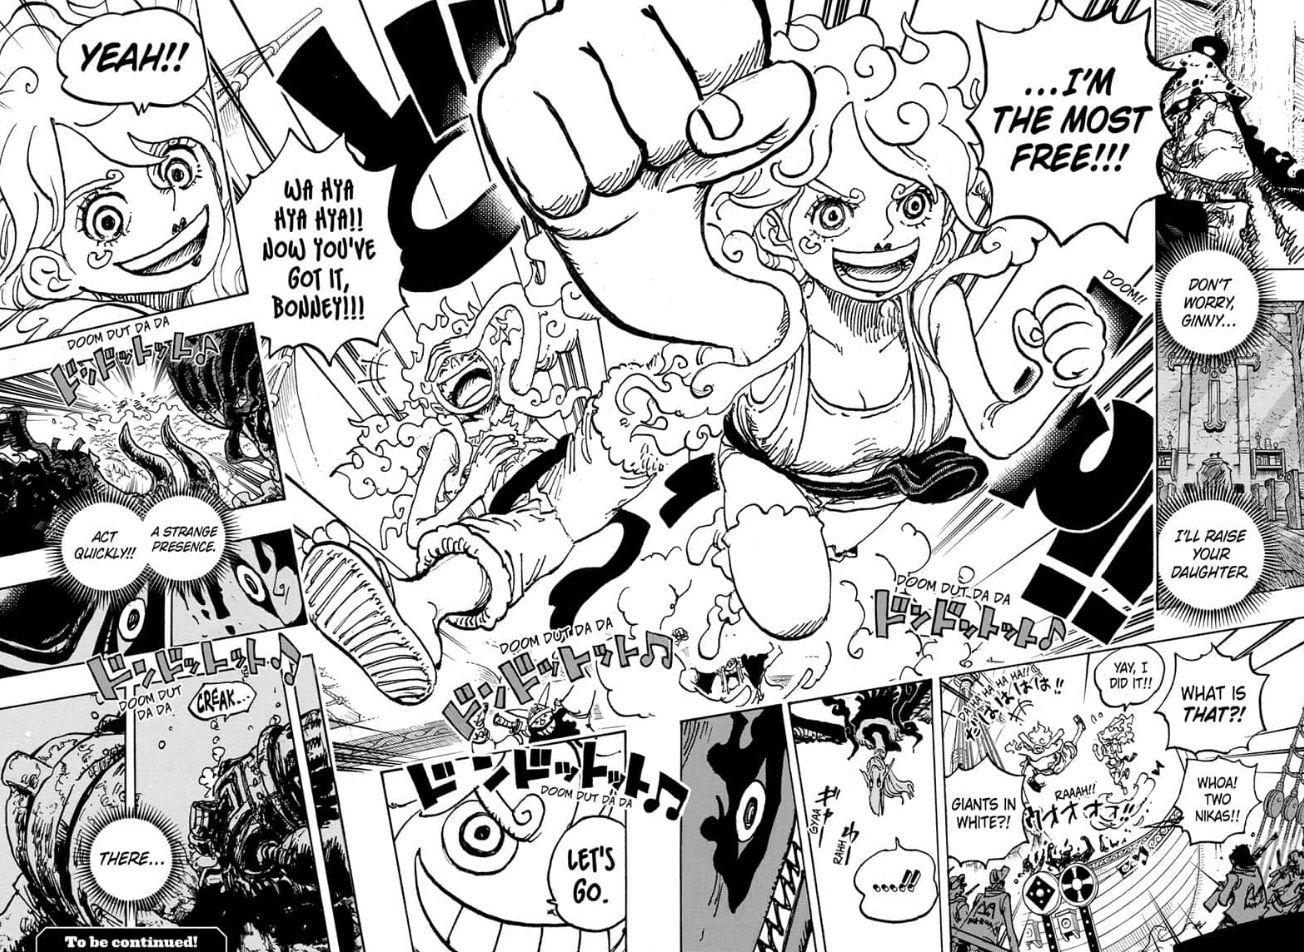 One Piece Chapter 1118, where Jewelry Bonney becomes Joy Girl.